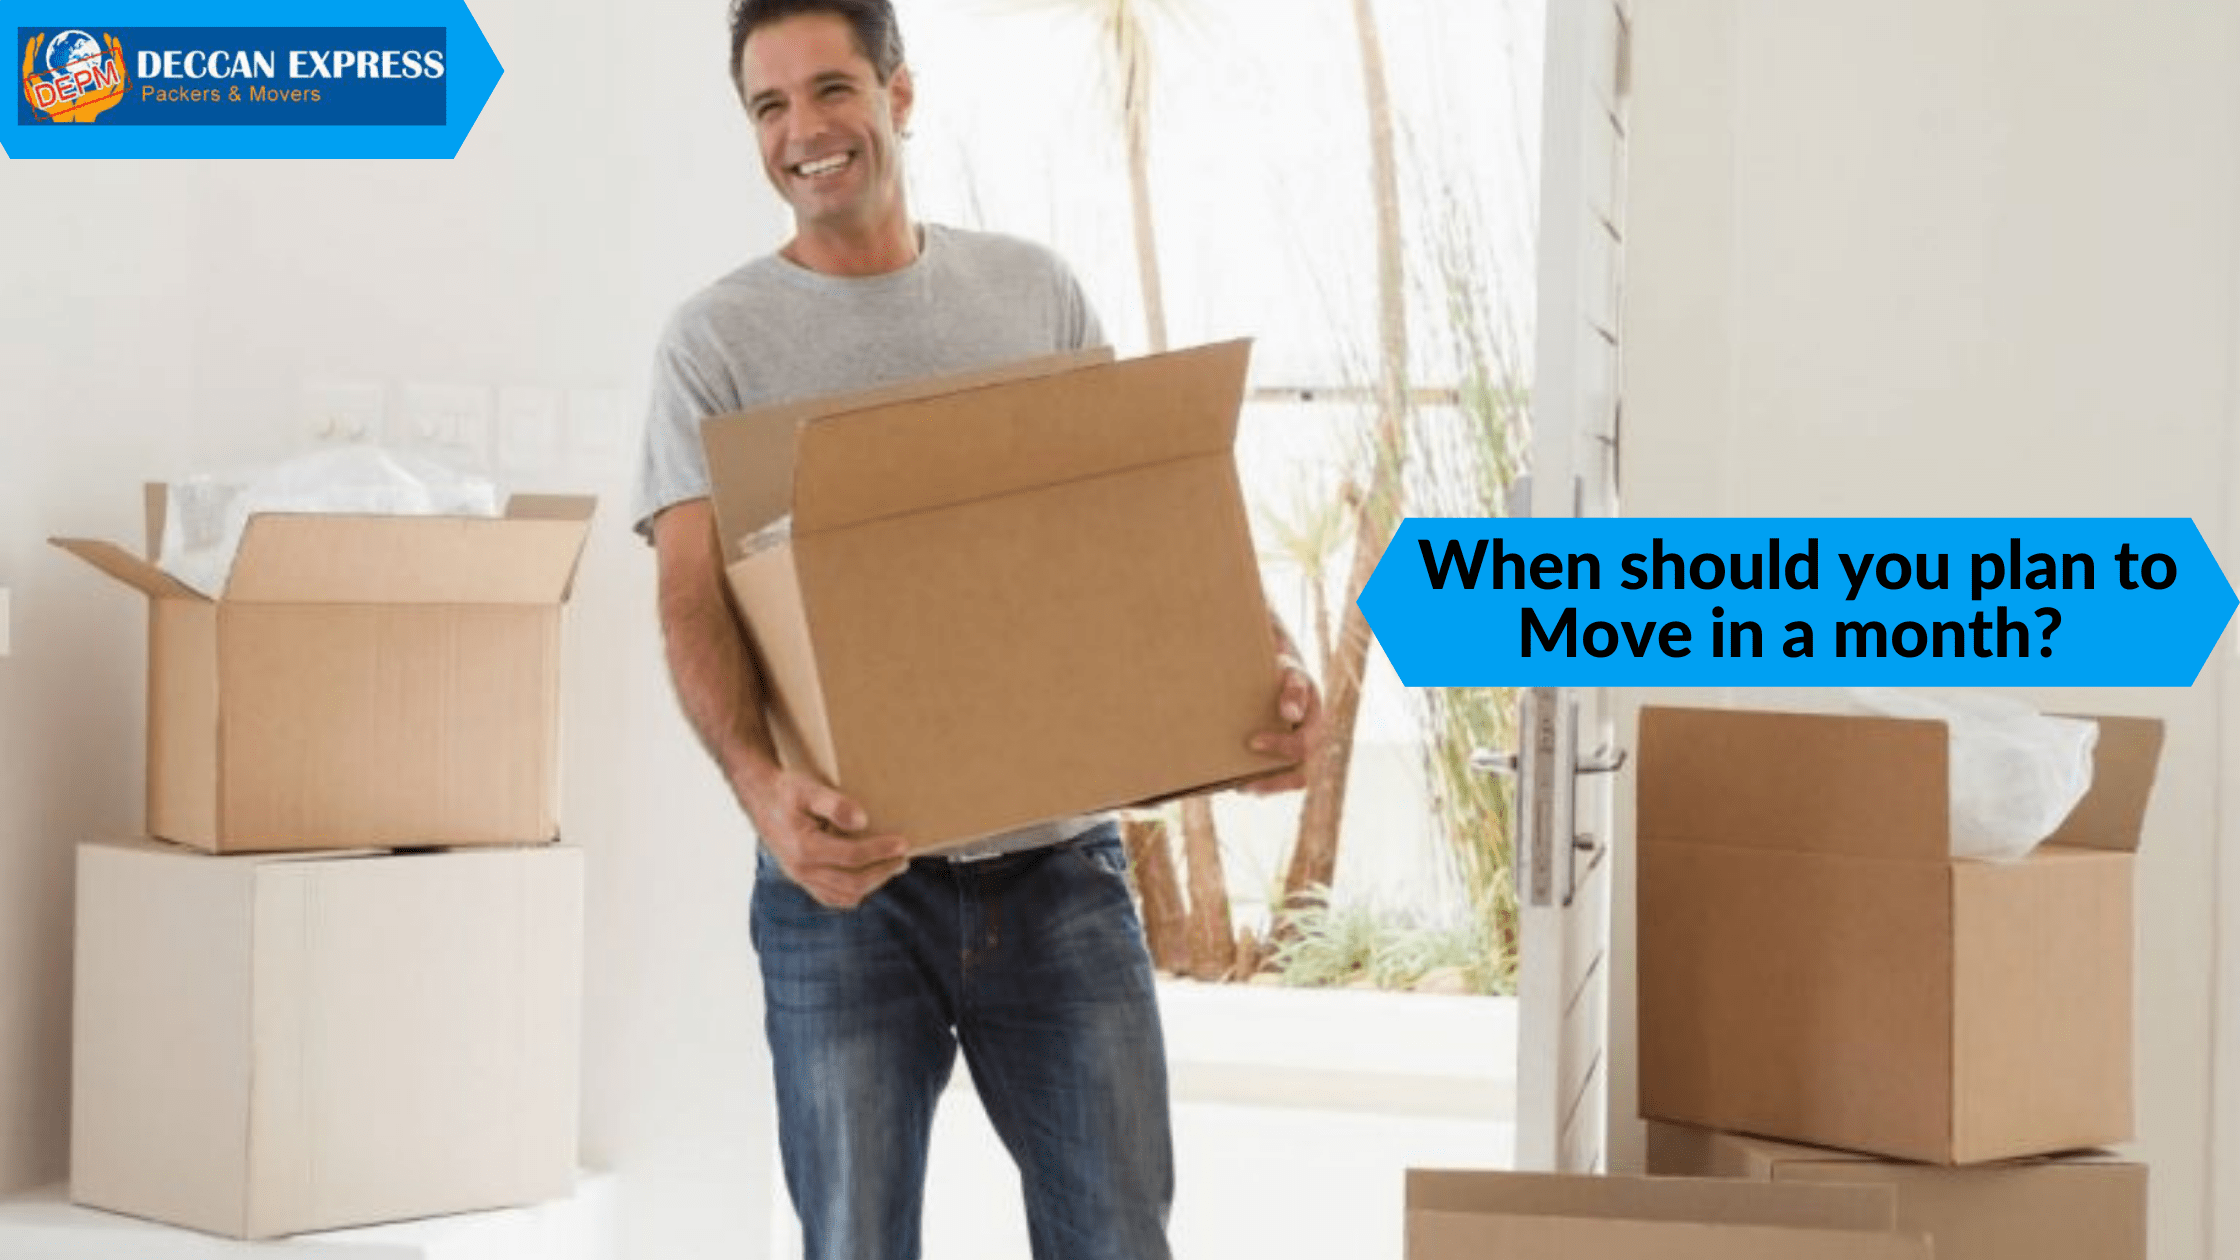 When should you plan to Move in a month?